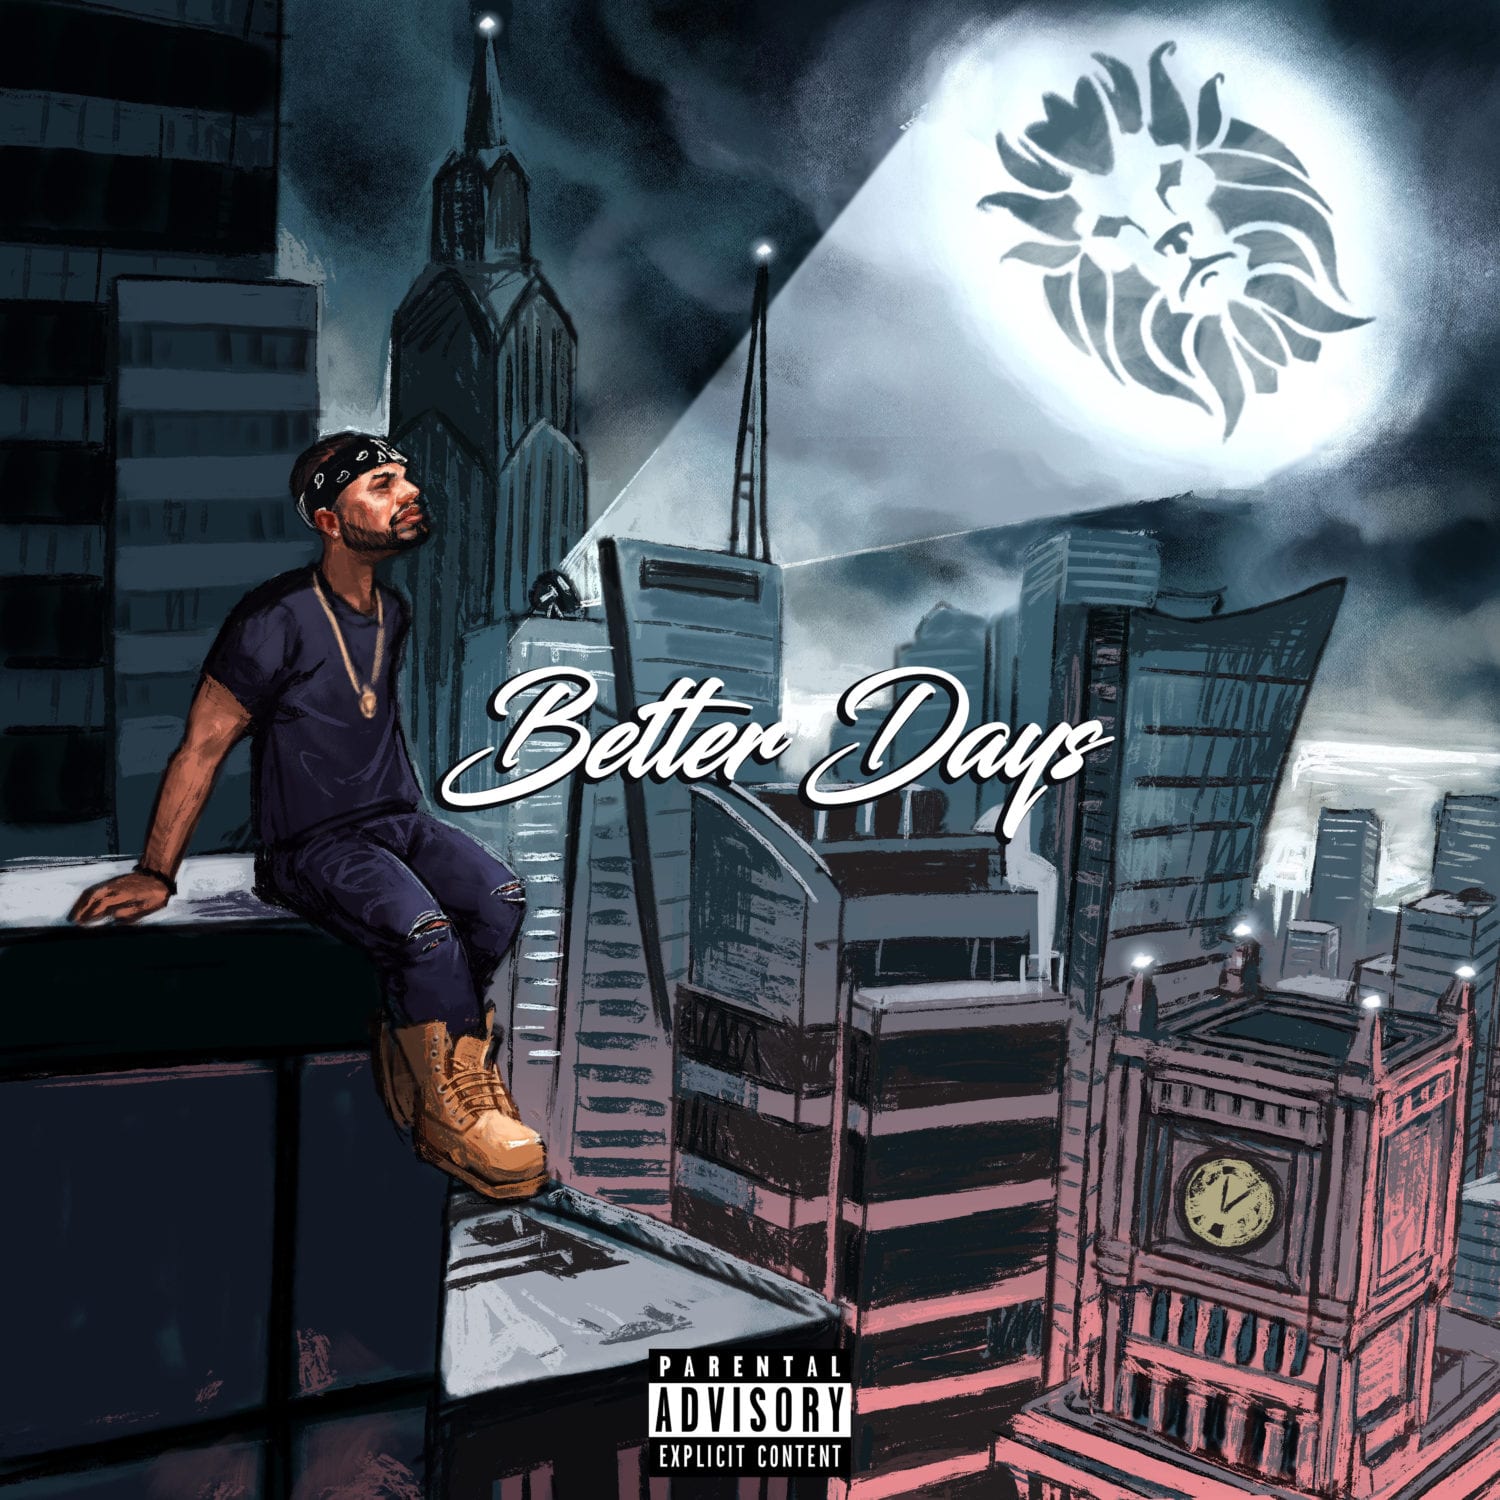 New Single By Remedy - "Better Days"